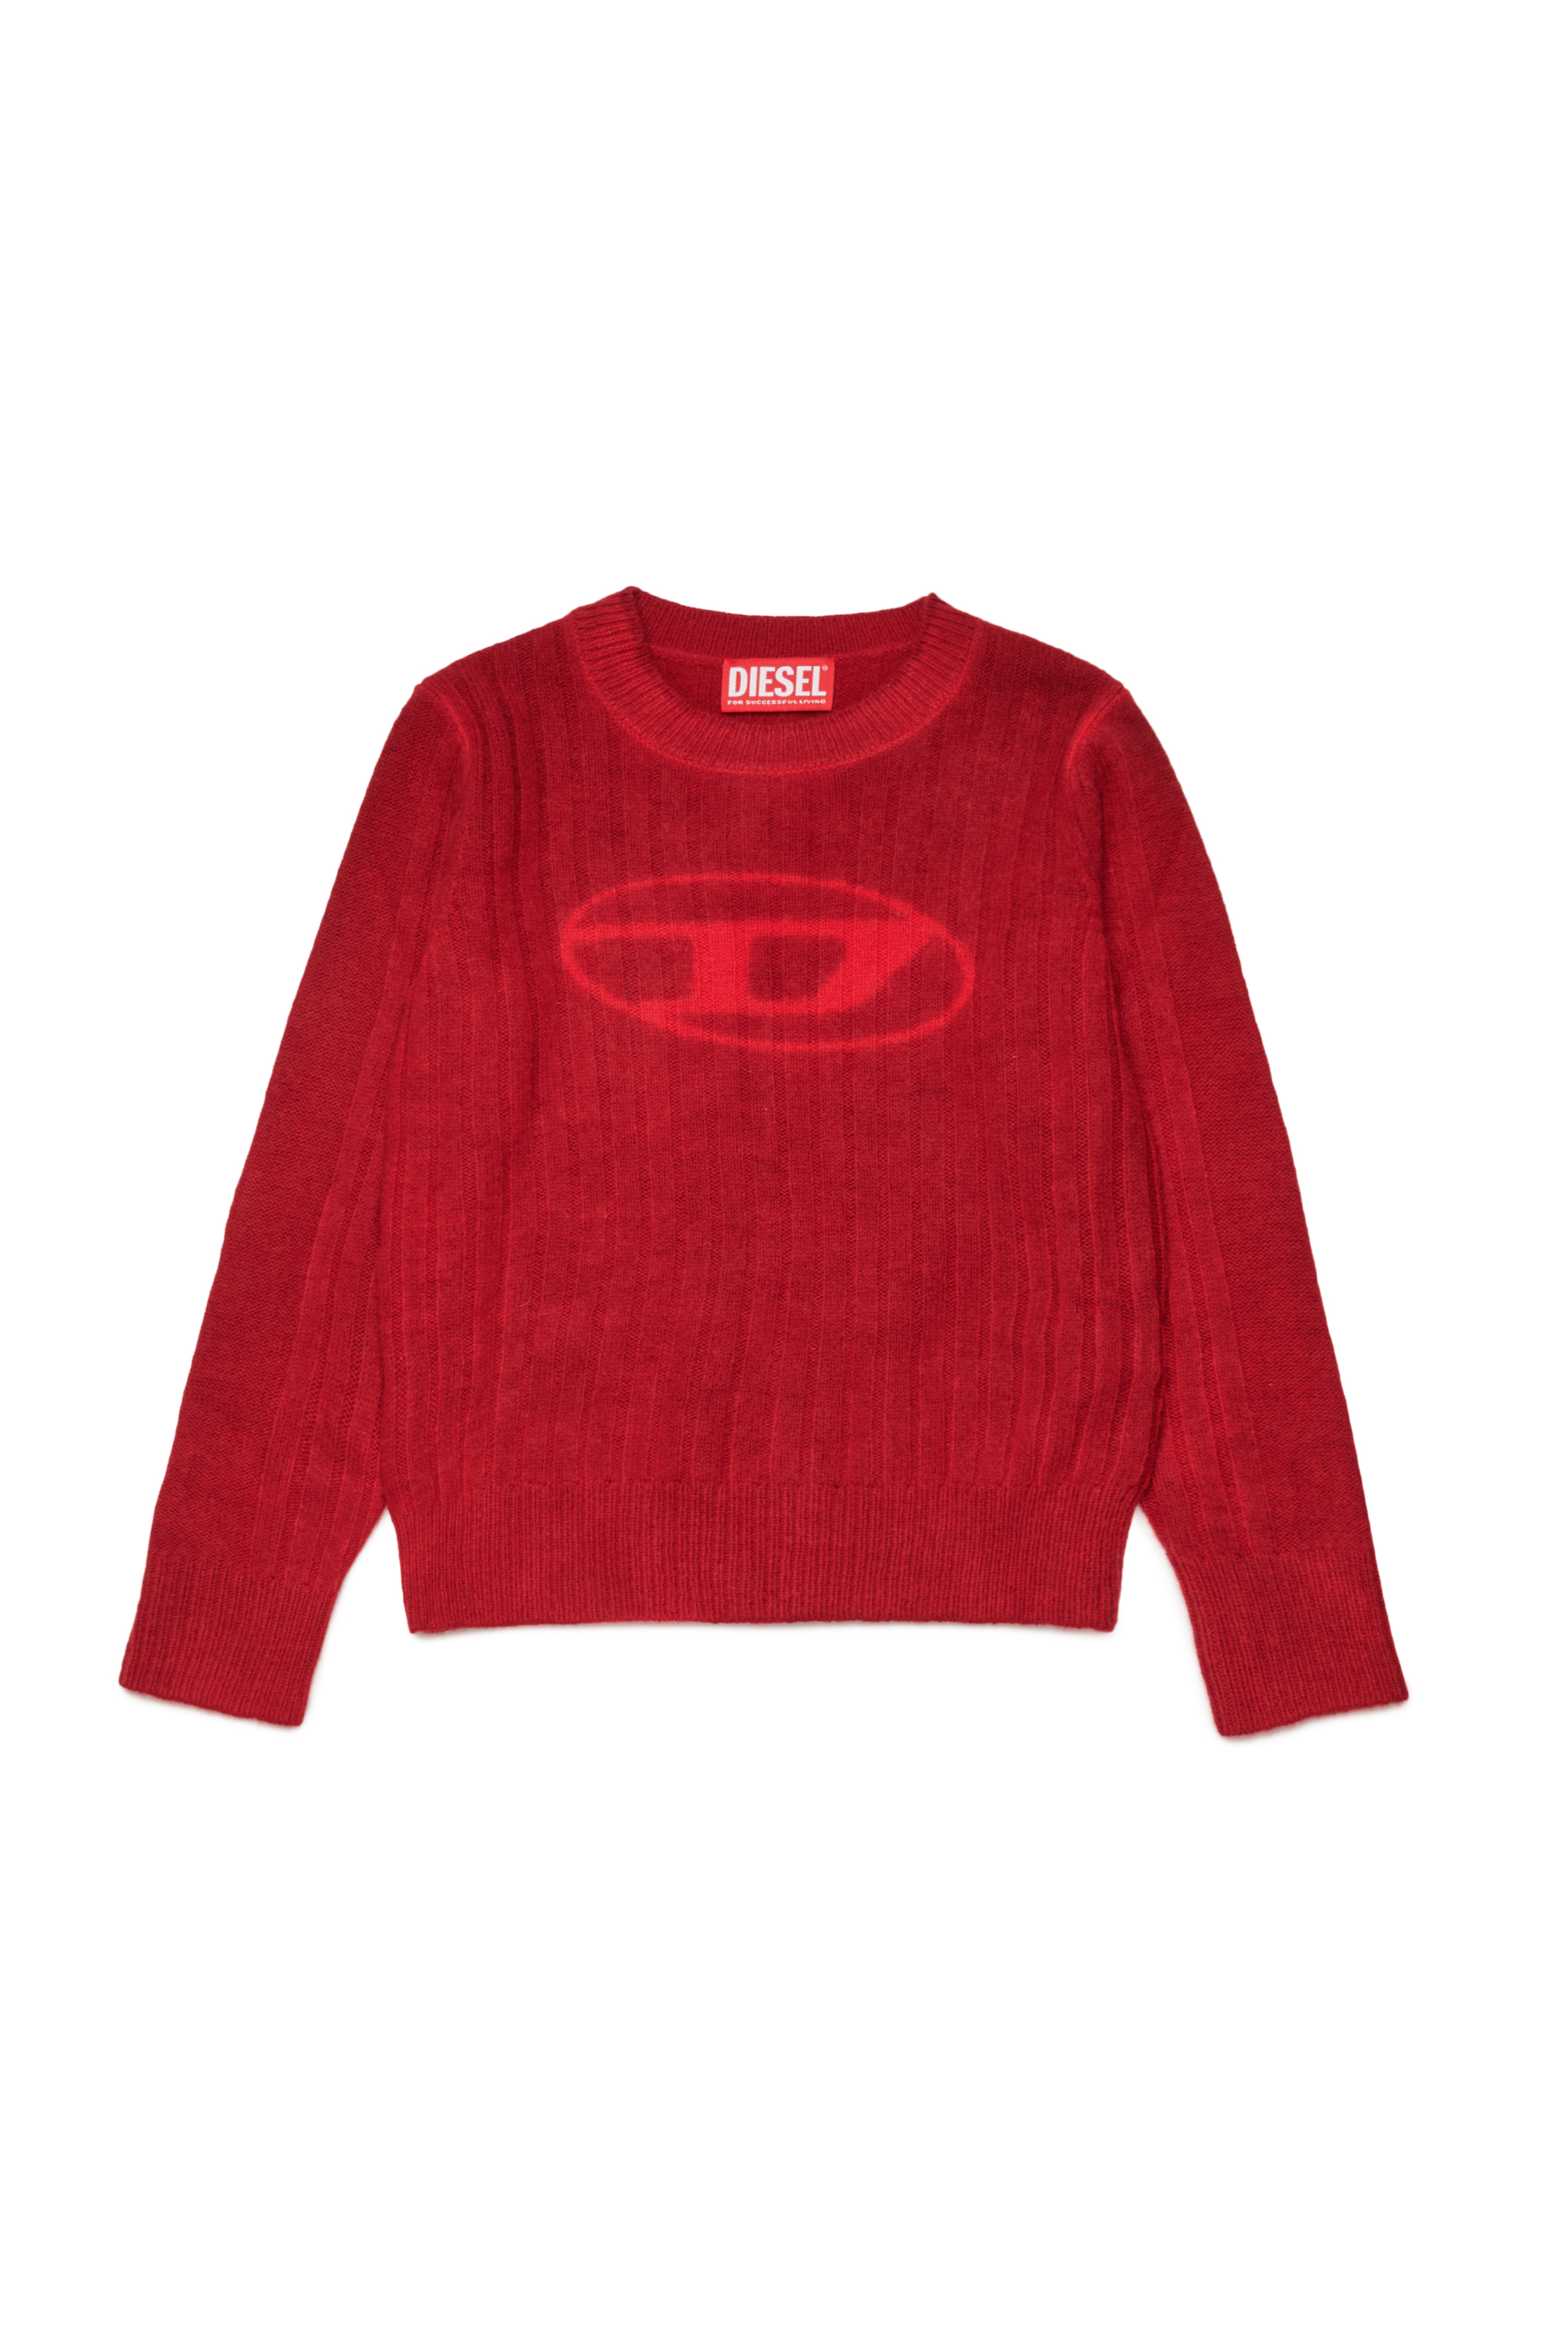 Diesel - KANDELEROD, Man Treated jumper with Oval D logo in Red - Image 1